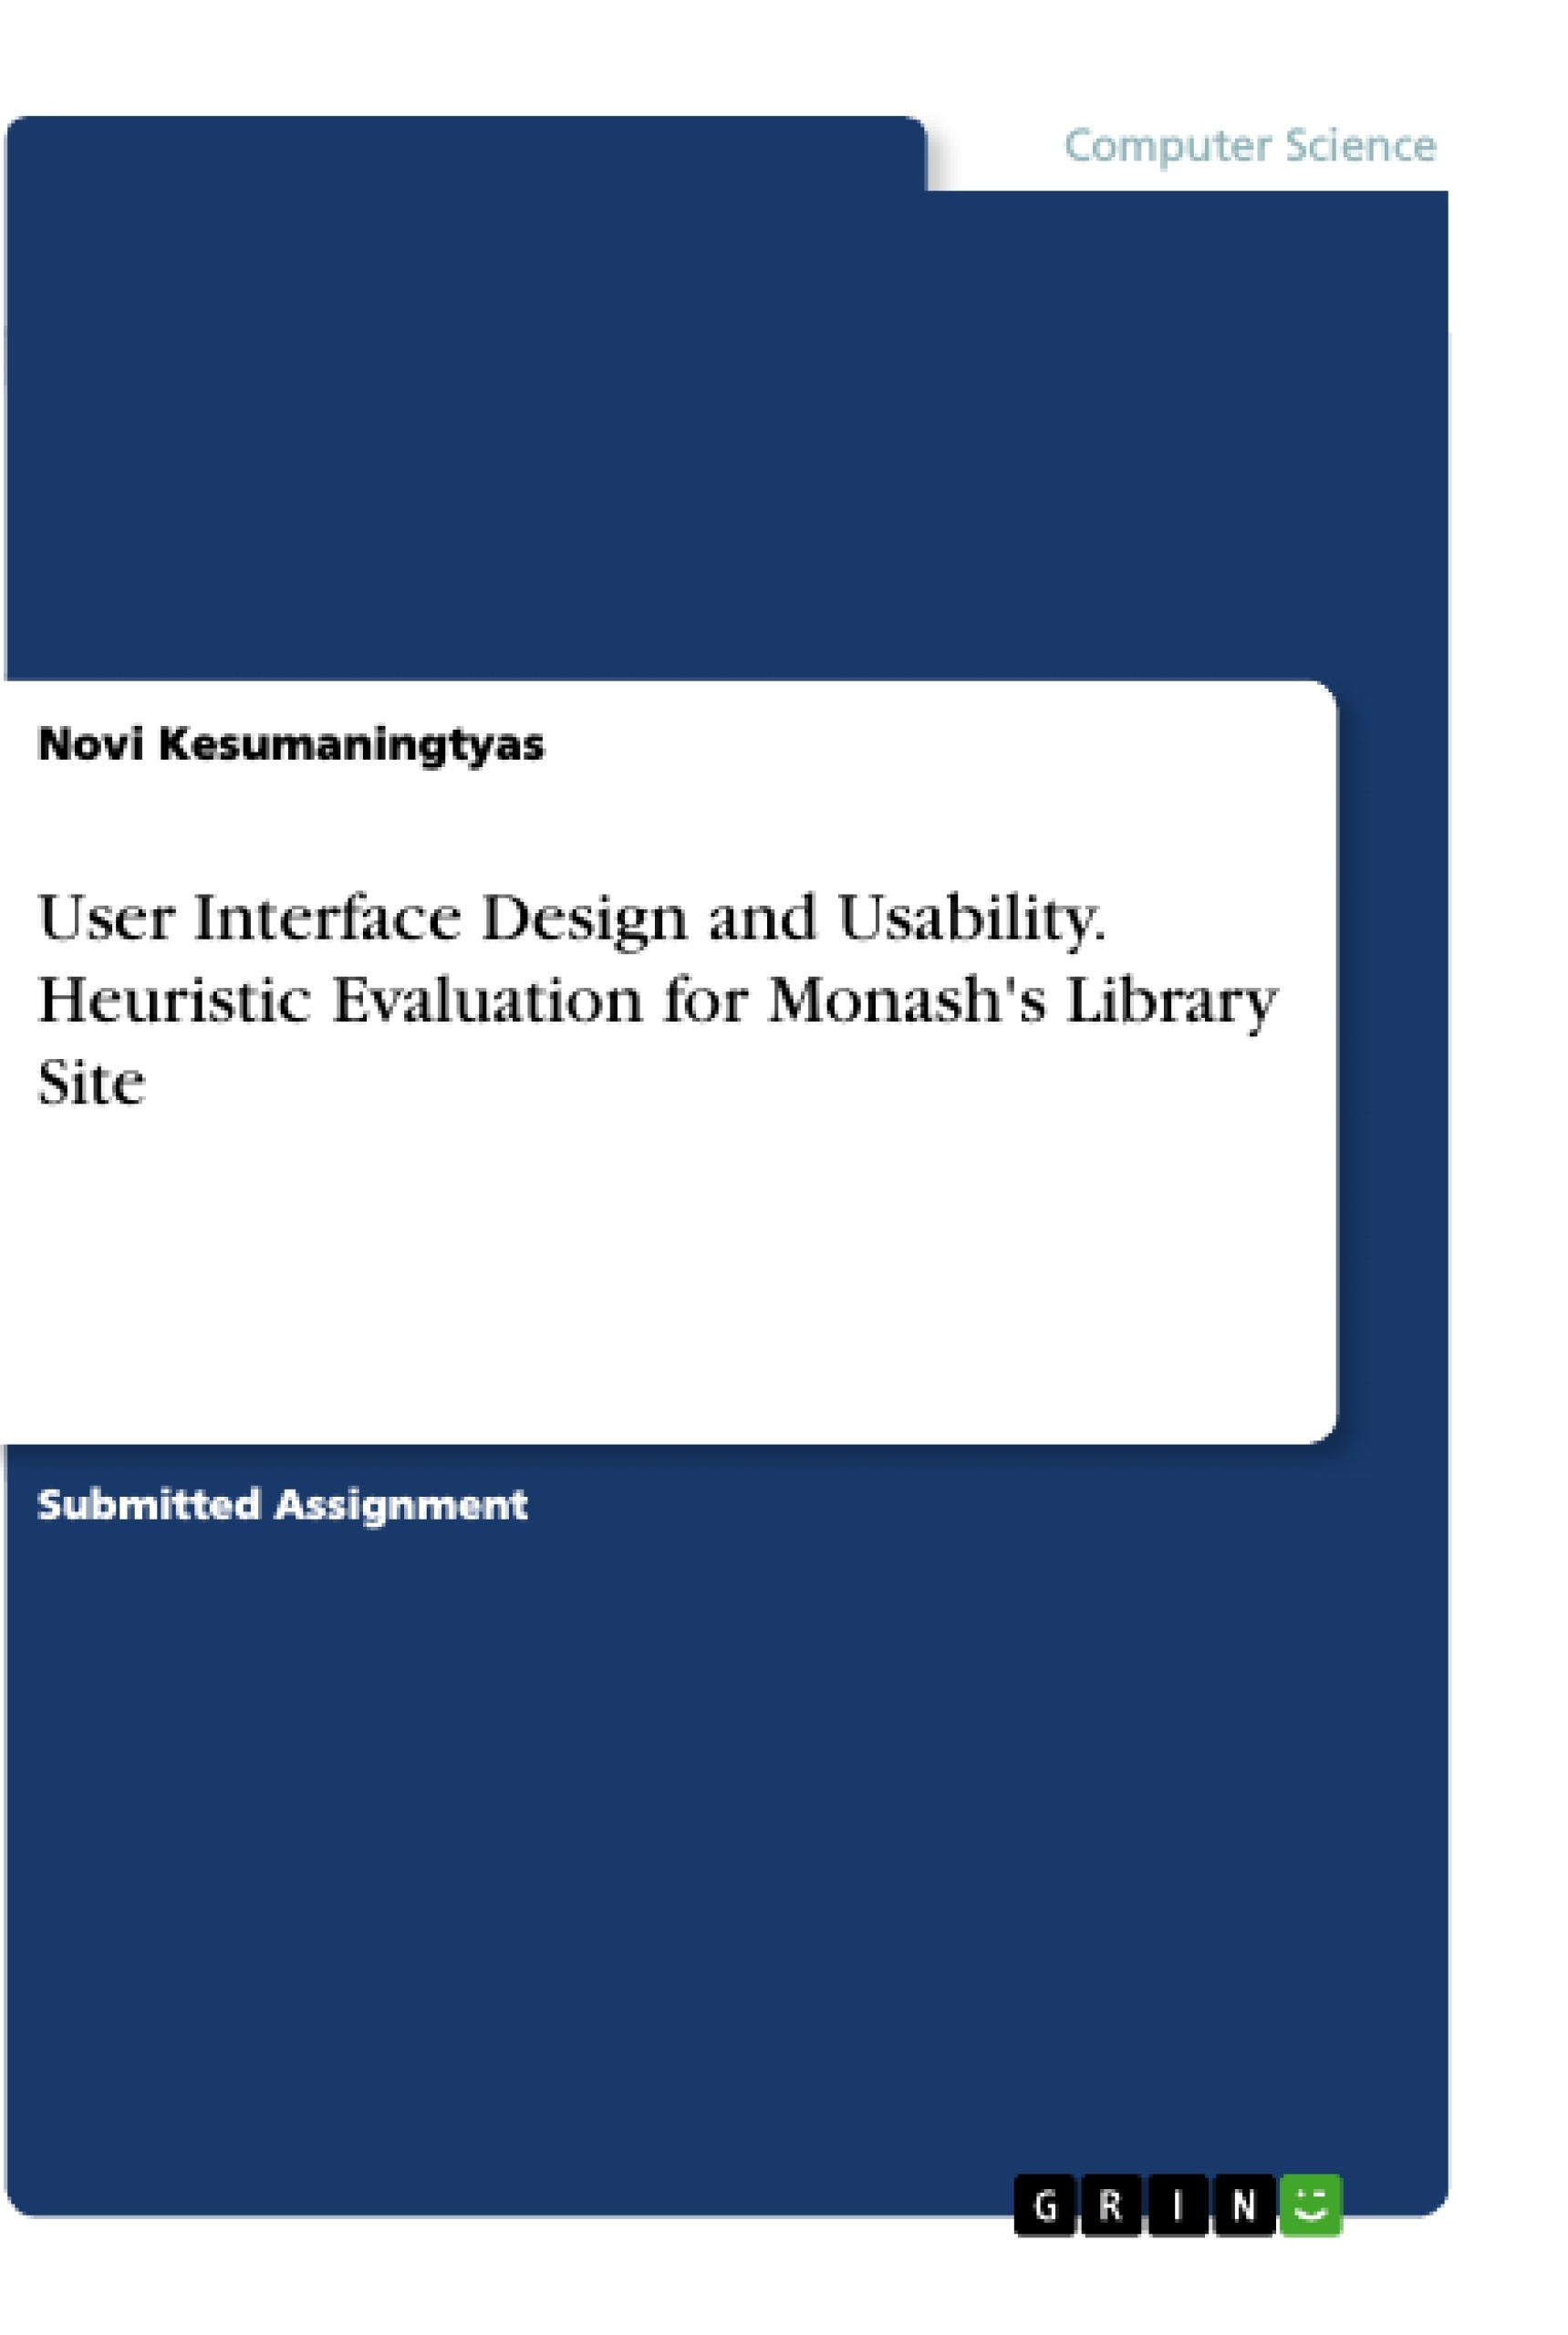 Titre: User Interface Design and Usability. Heuristic Evaluation for Monash's Library Site